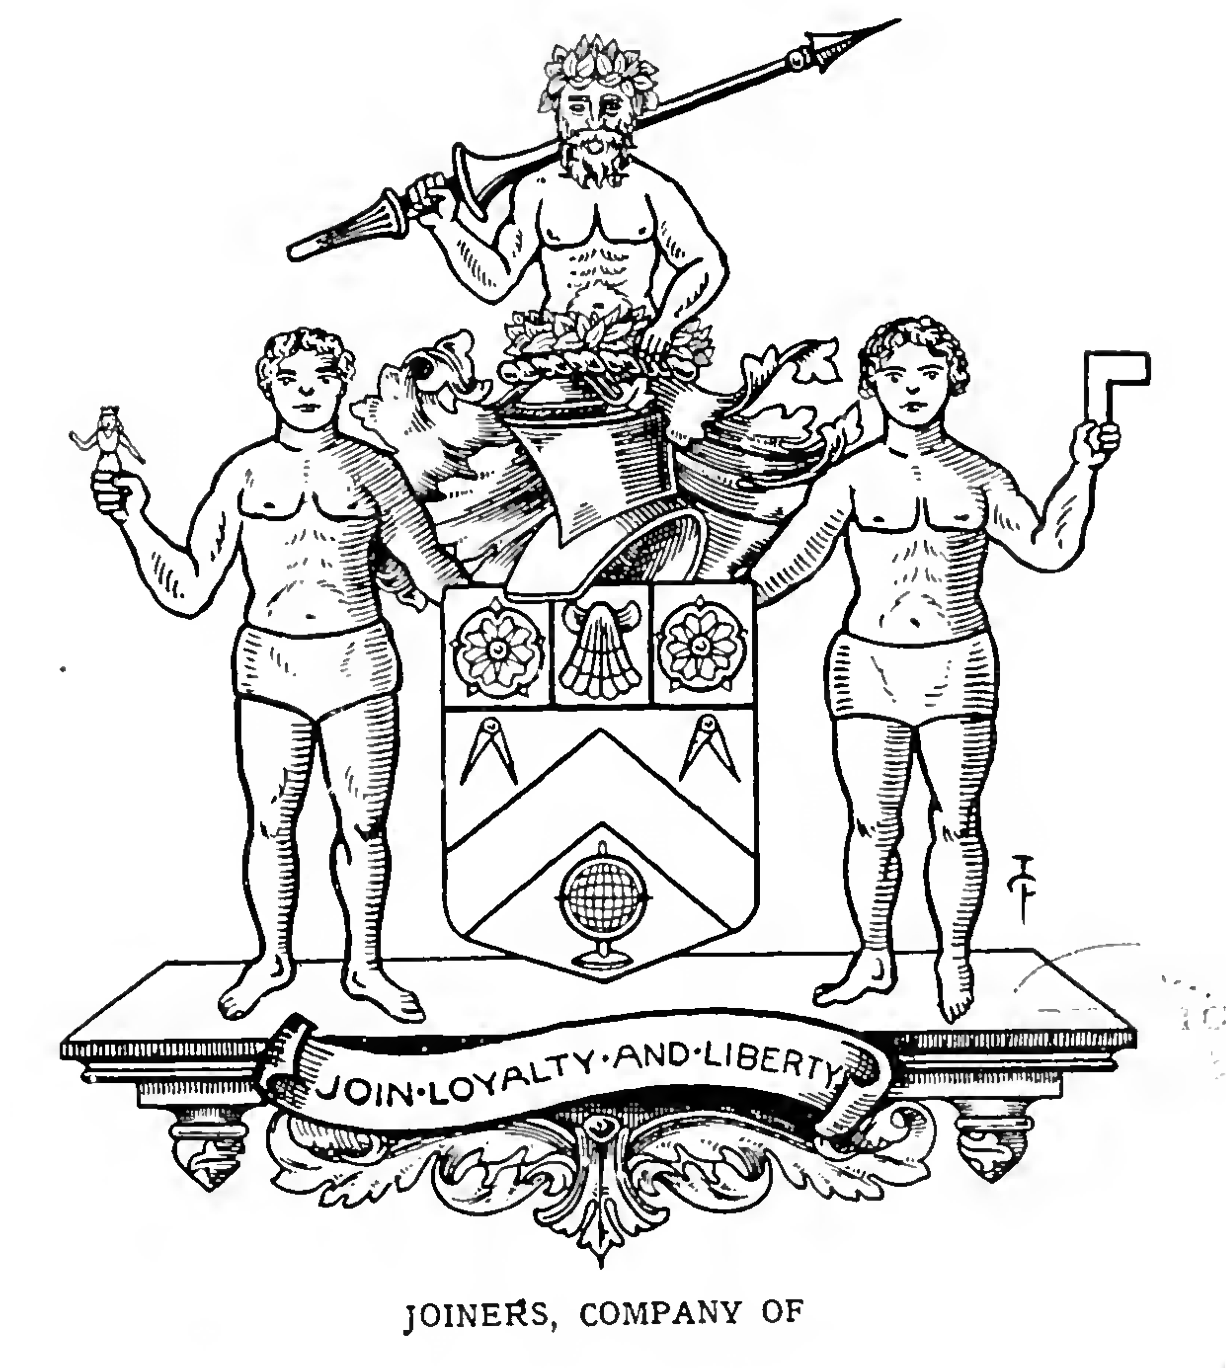 JOINERS, The Worshipful Company of, London.